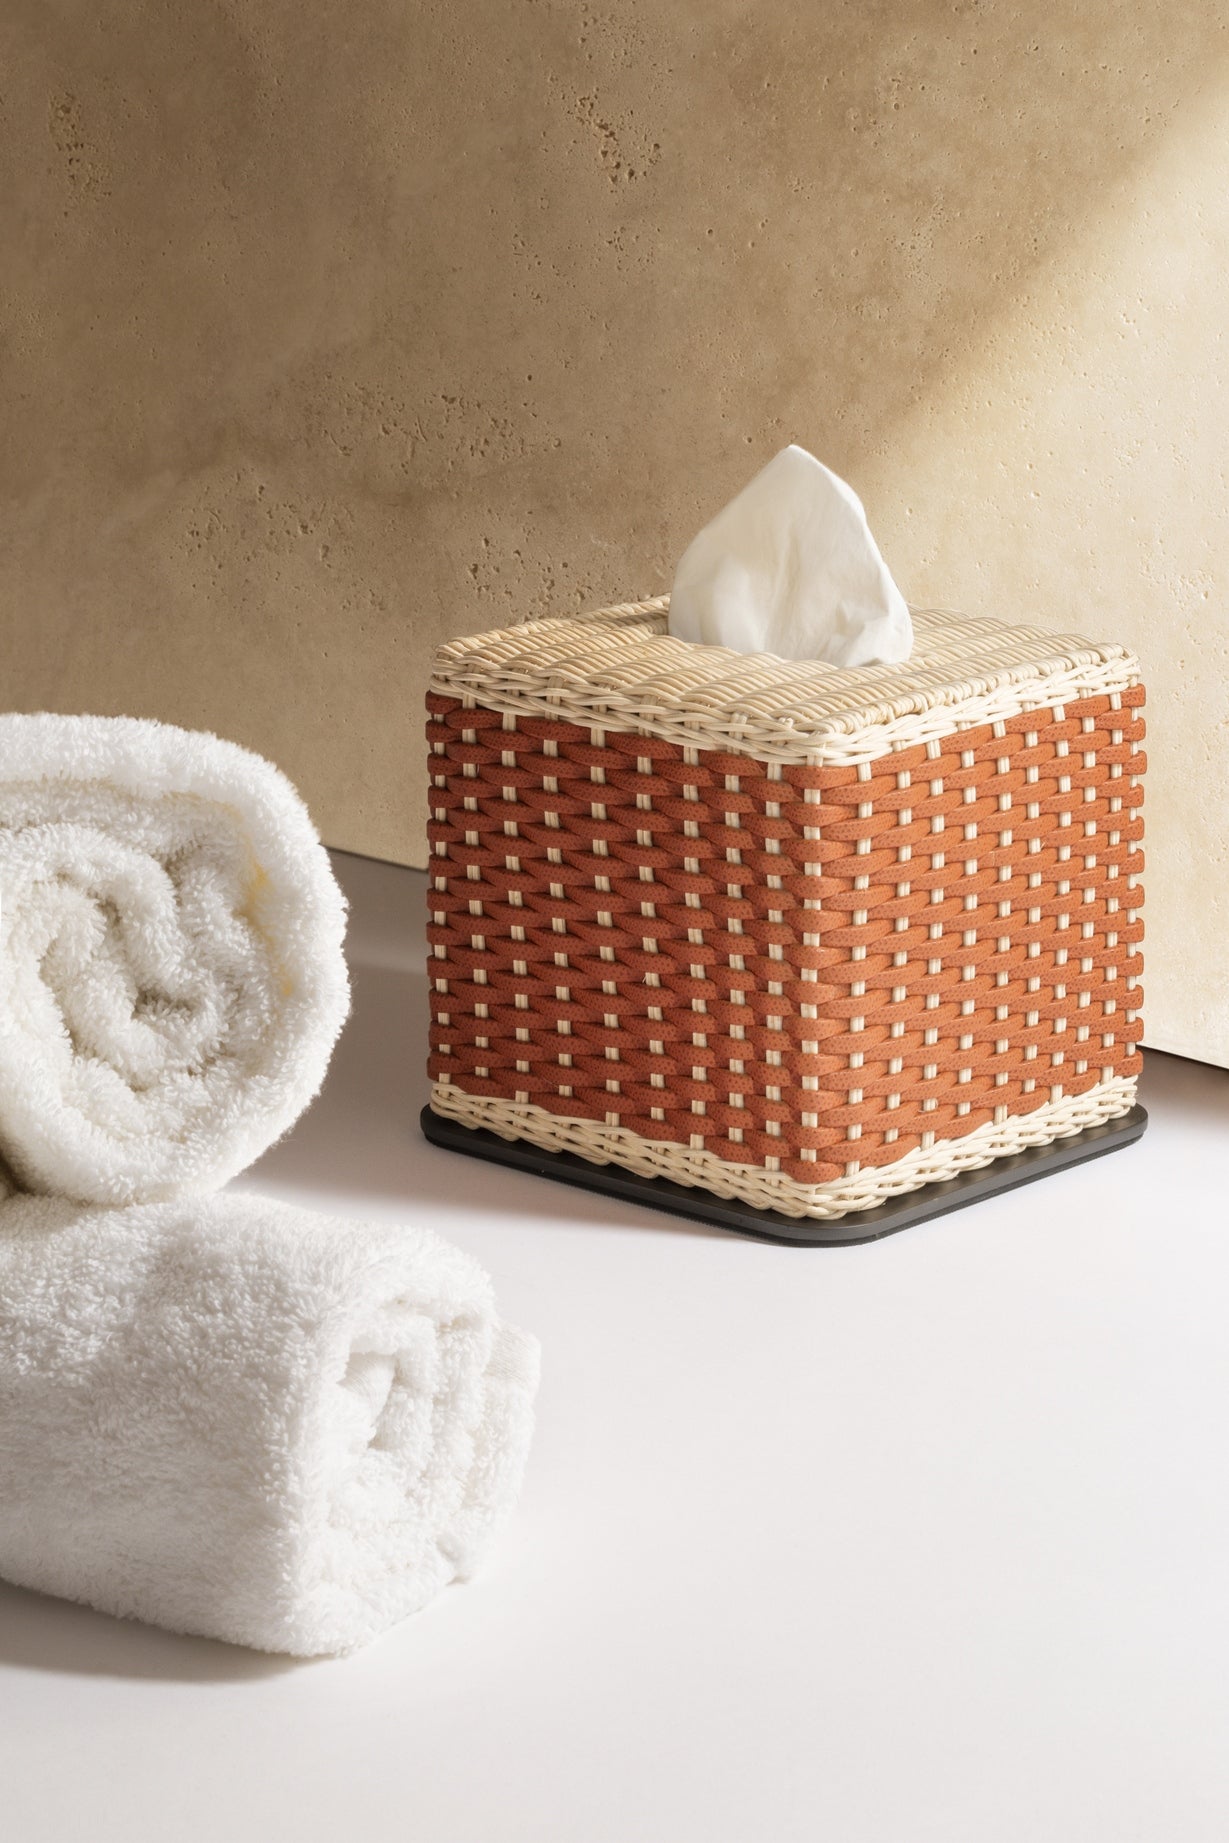 Pigment France Amiens Leather & Rattan Tissue Holder with Metal Frame | Stylish and Functional Design | Perfect for Home Decor | Explore a Range of Luxury Home Accessories at 2Jour Concierge, #1 luxury high-end gift & lifestyle shop